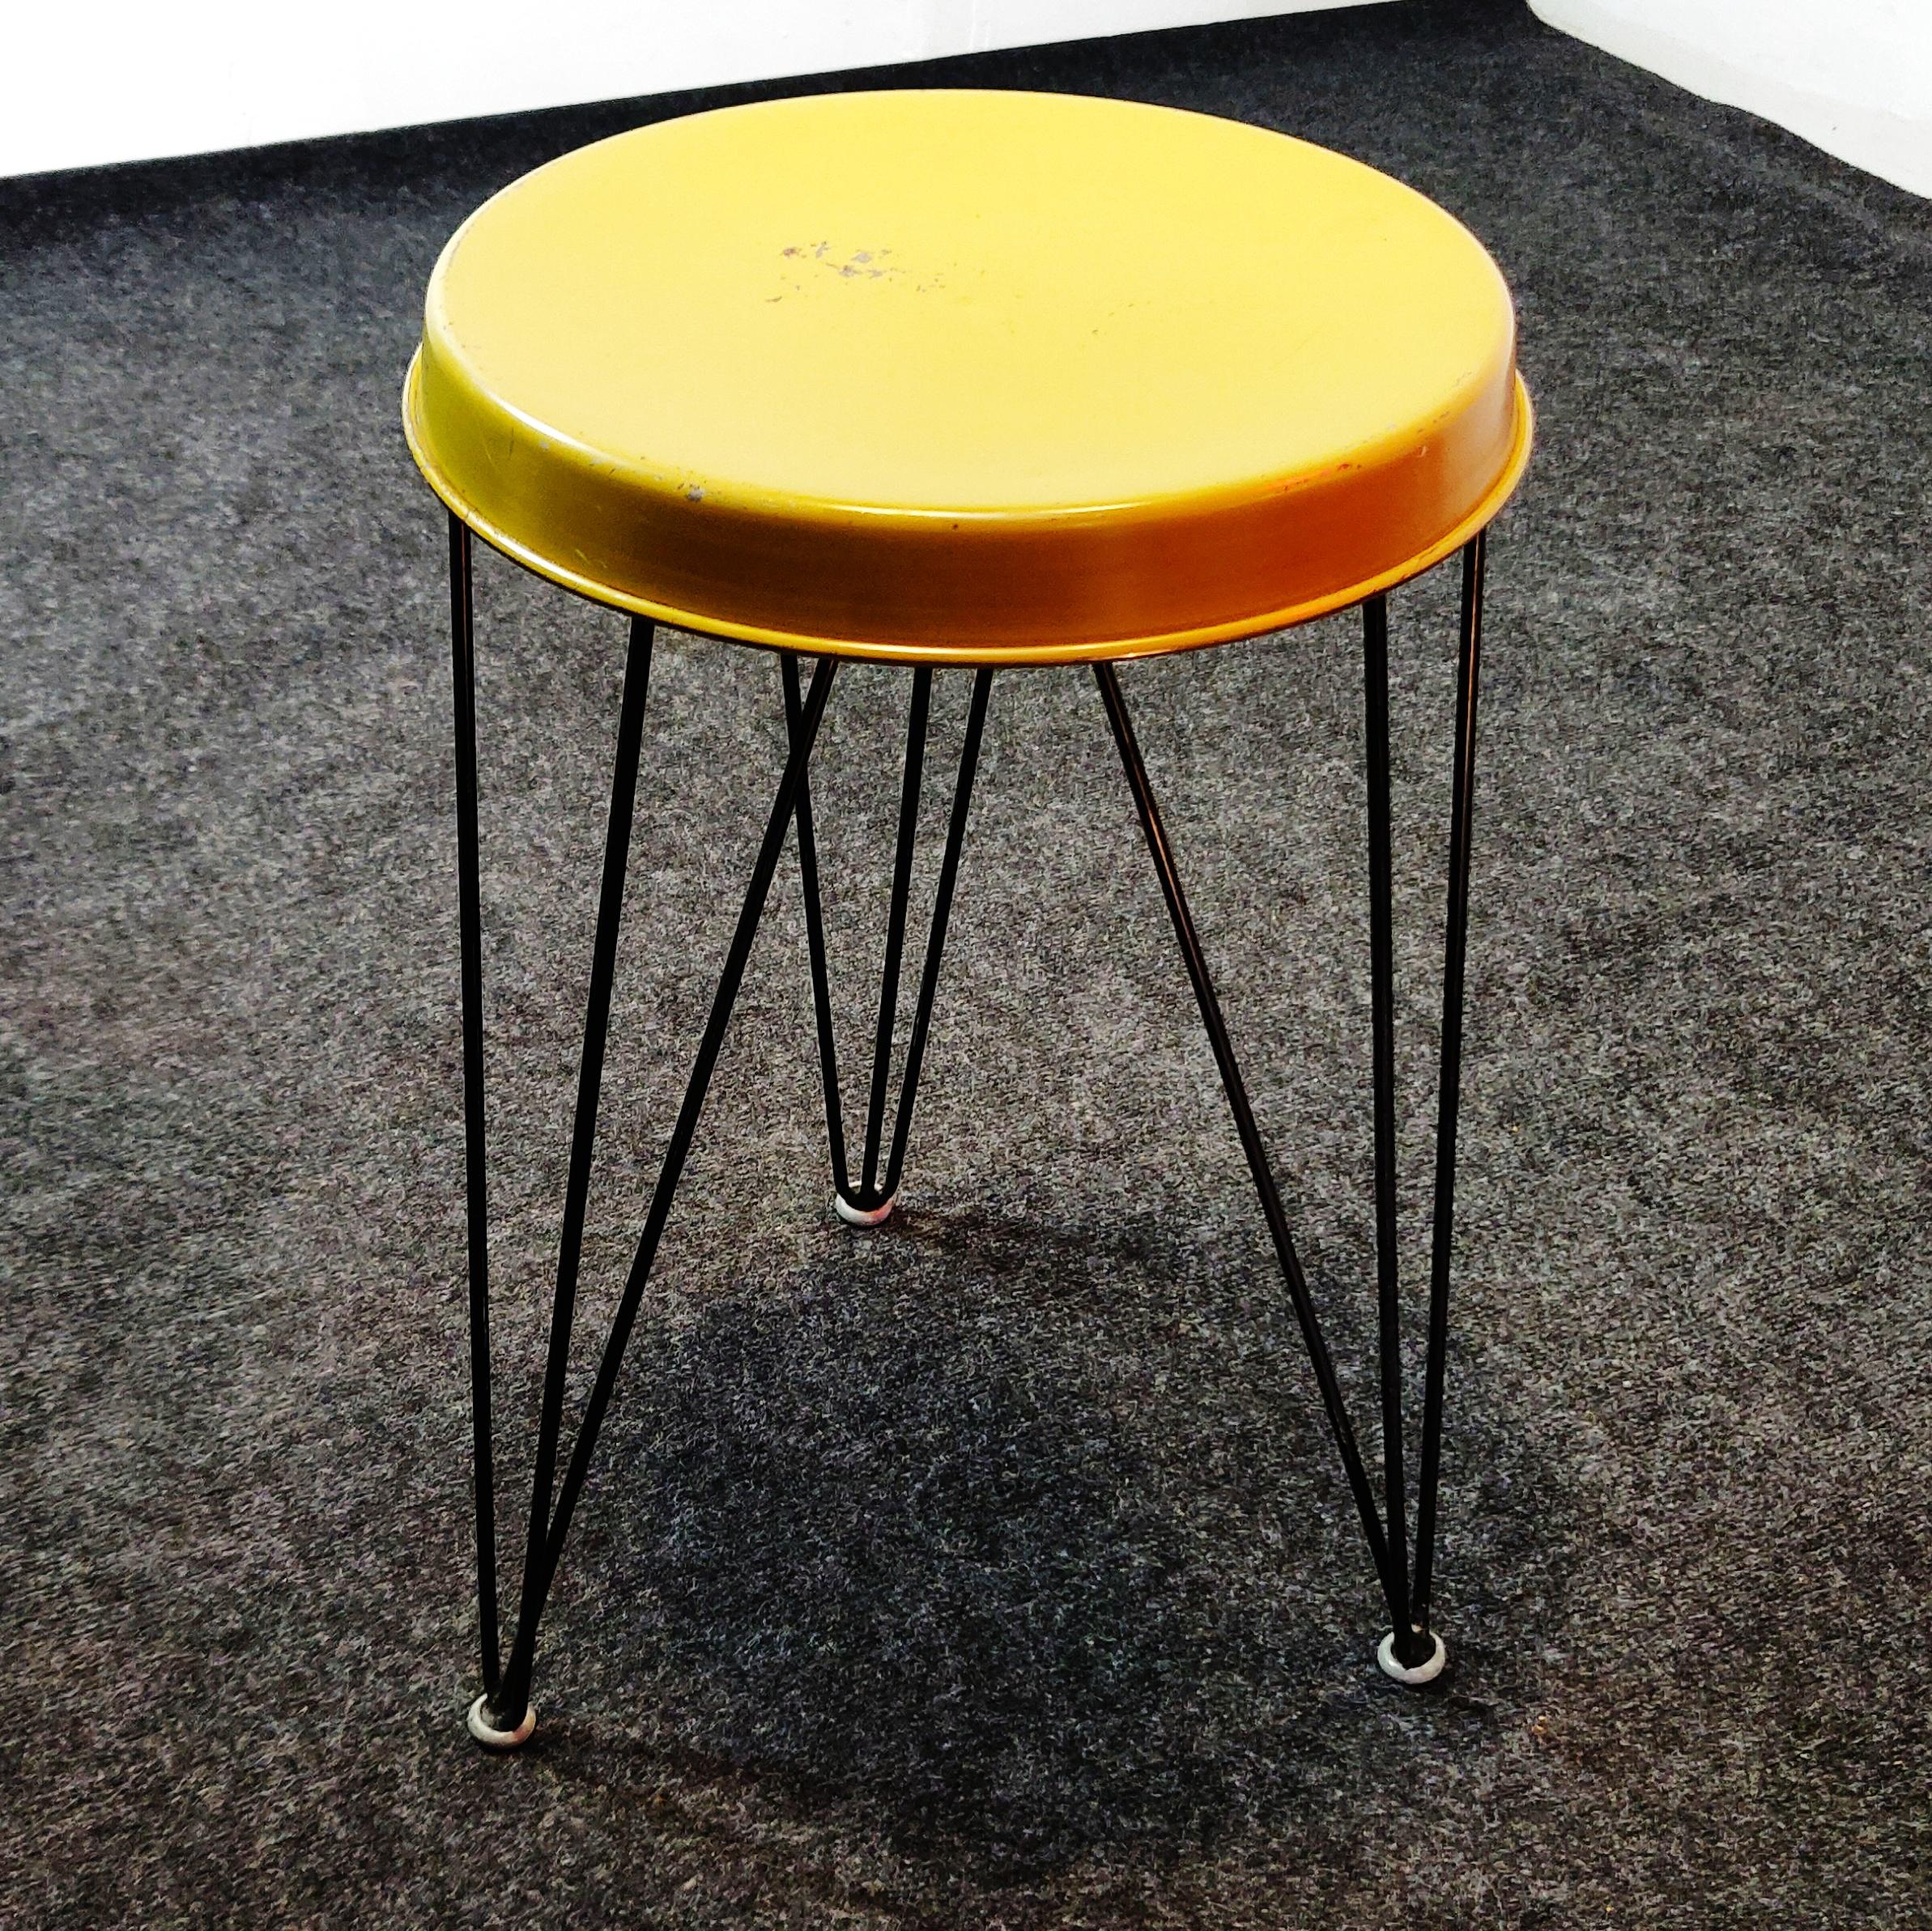 Sculptural vintage stool by Tjerk Reijenga for Pilastro, 1960s. 
Sculptural metal wire base and plate metal seat. Designed in 1966 by Tjerk Reijenga for Pilastro, Zwanenburg – Holland. 
Tjerk Reijenga was the leading designer of the Pilastro